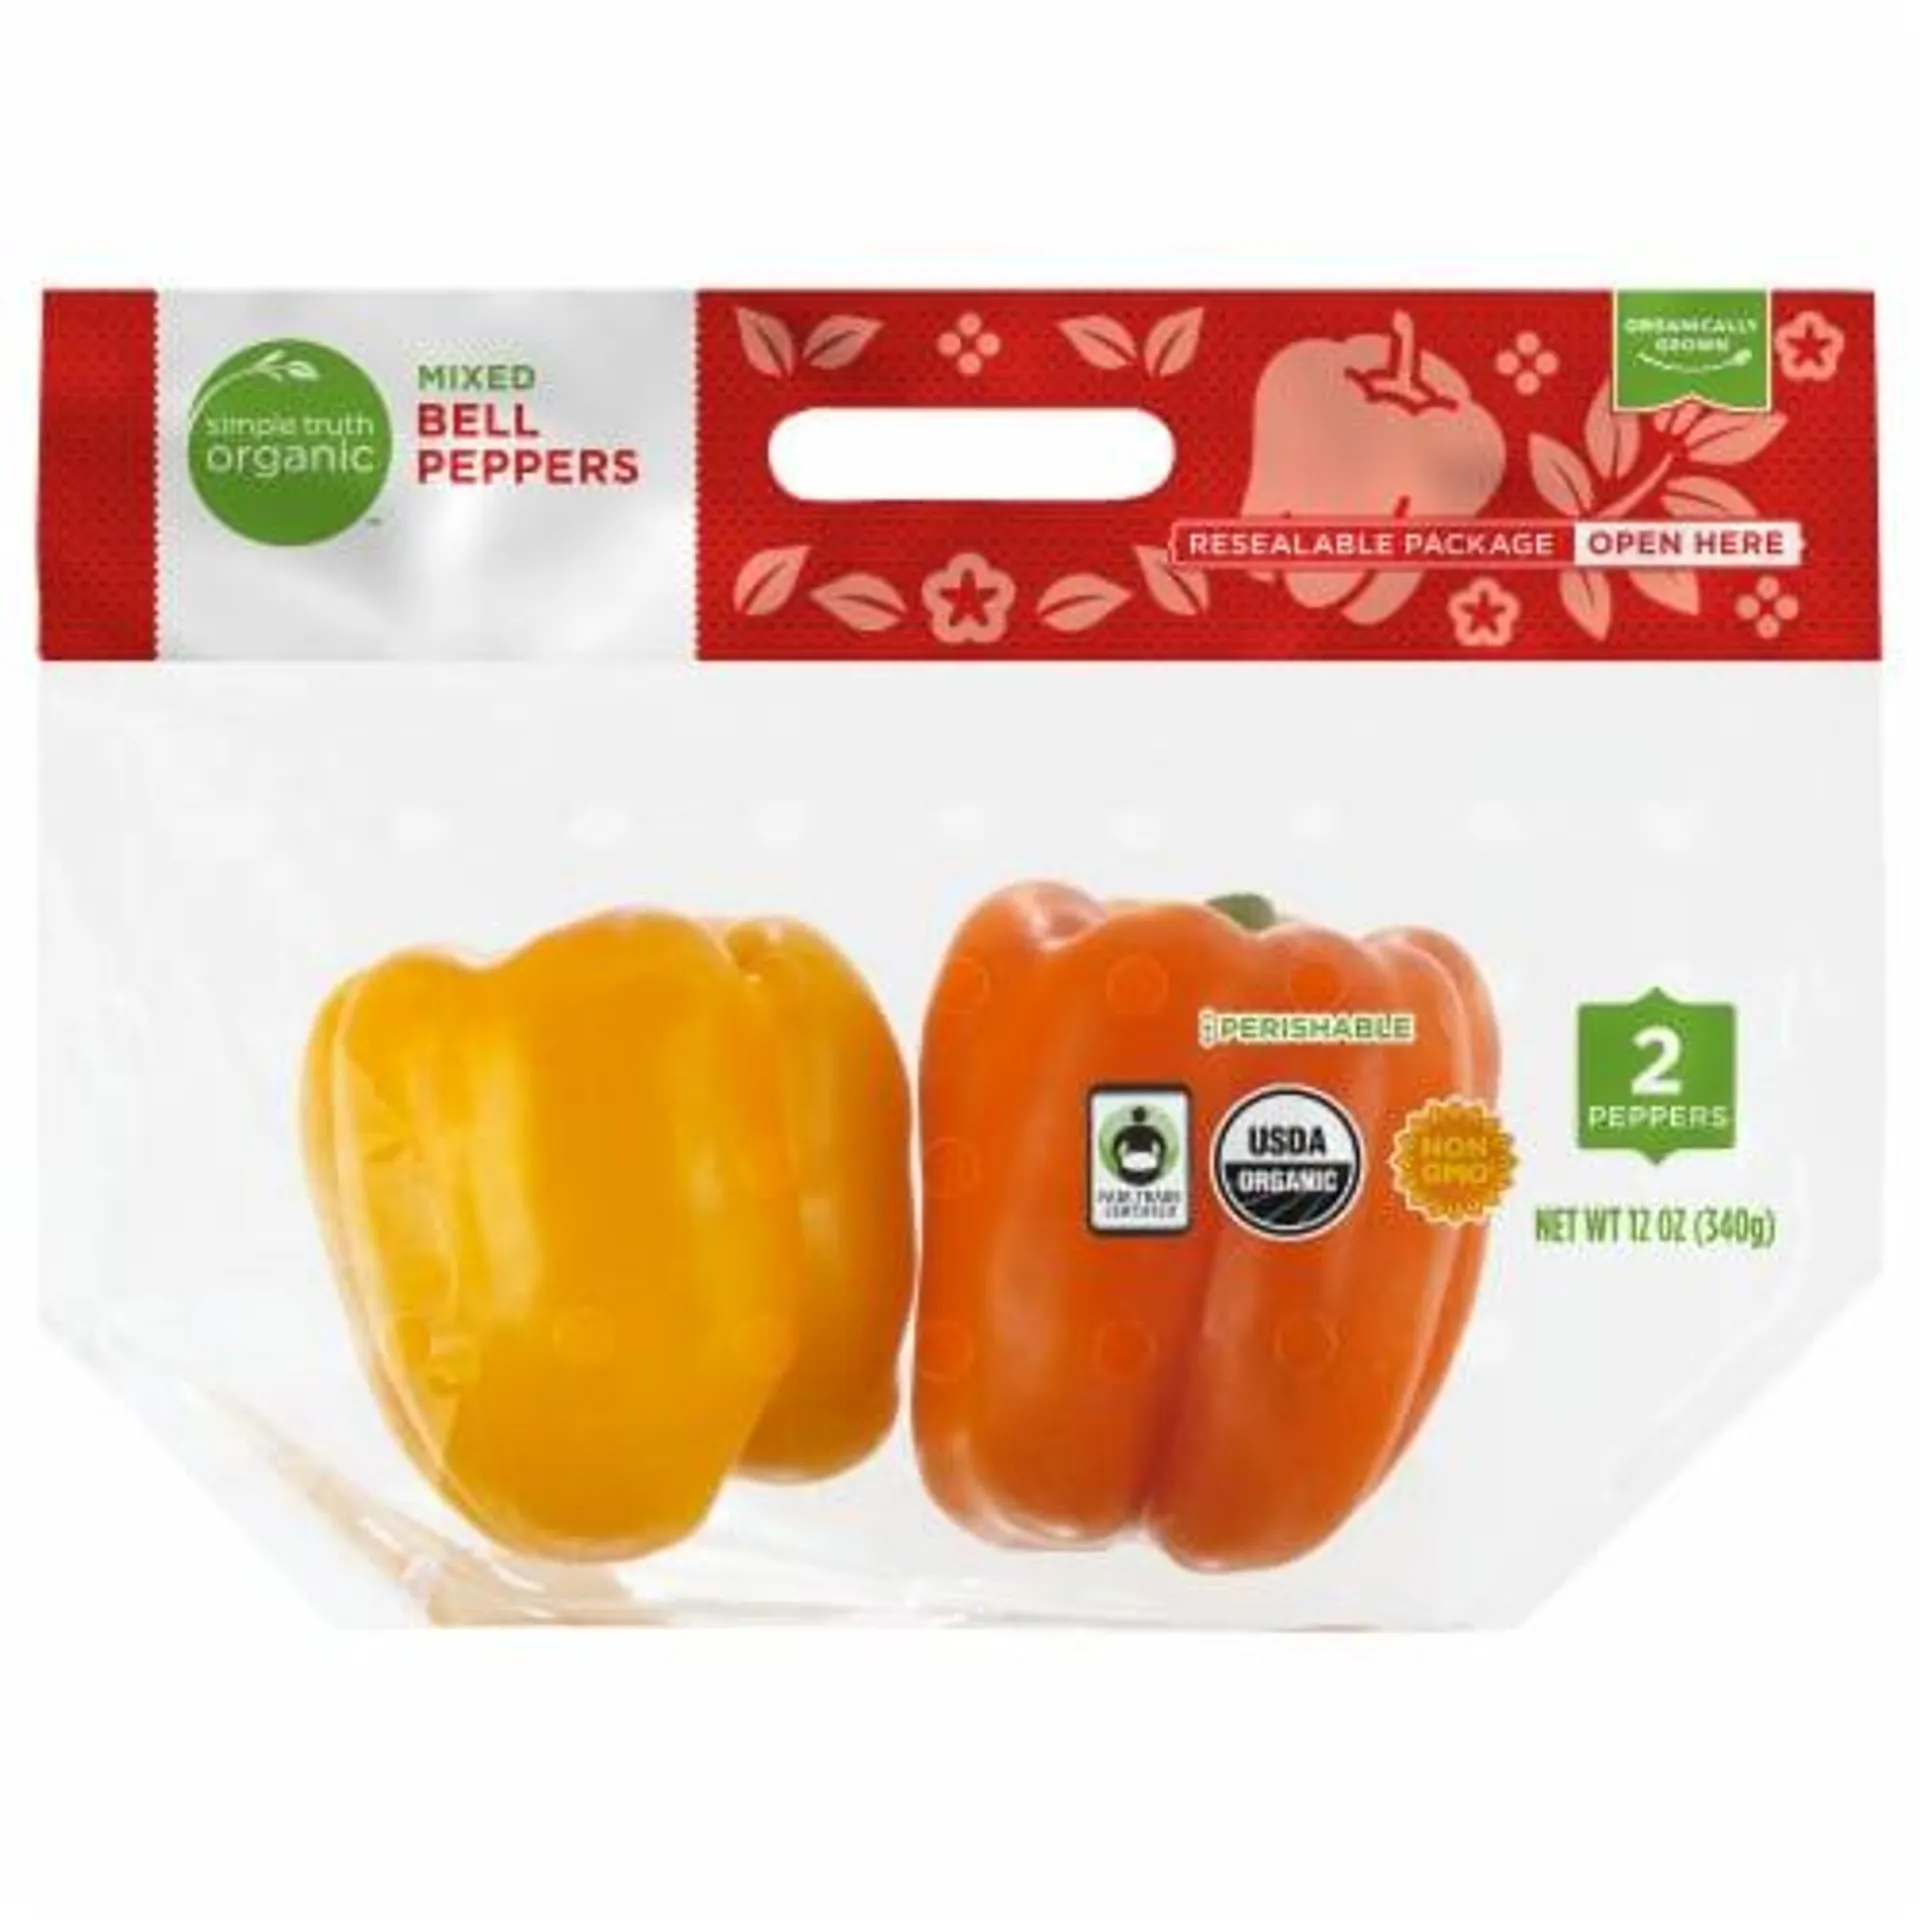 Simple Truth Organic™ Mixed Bell Peppers